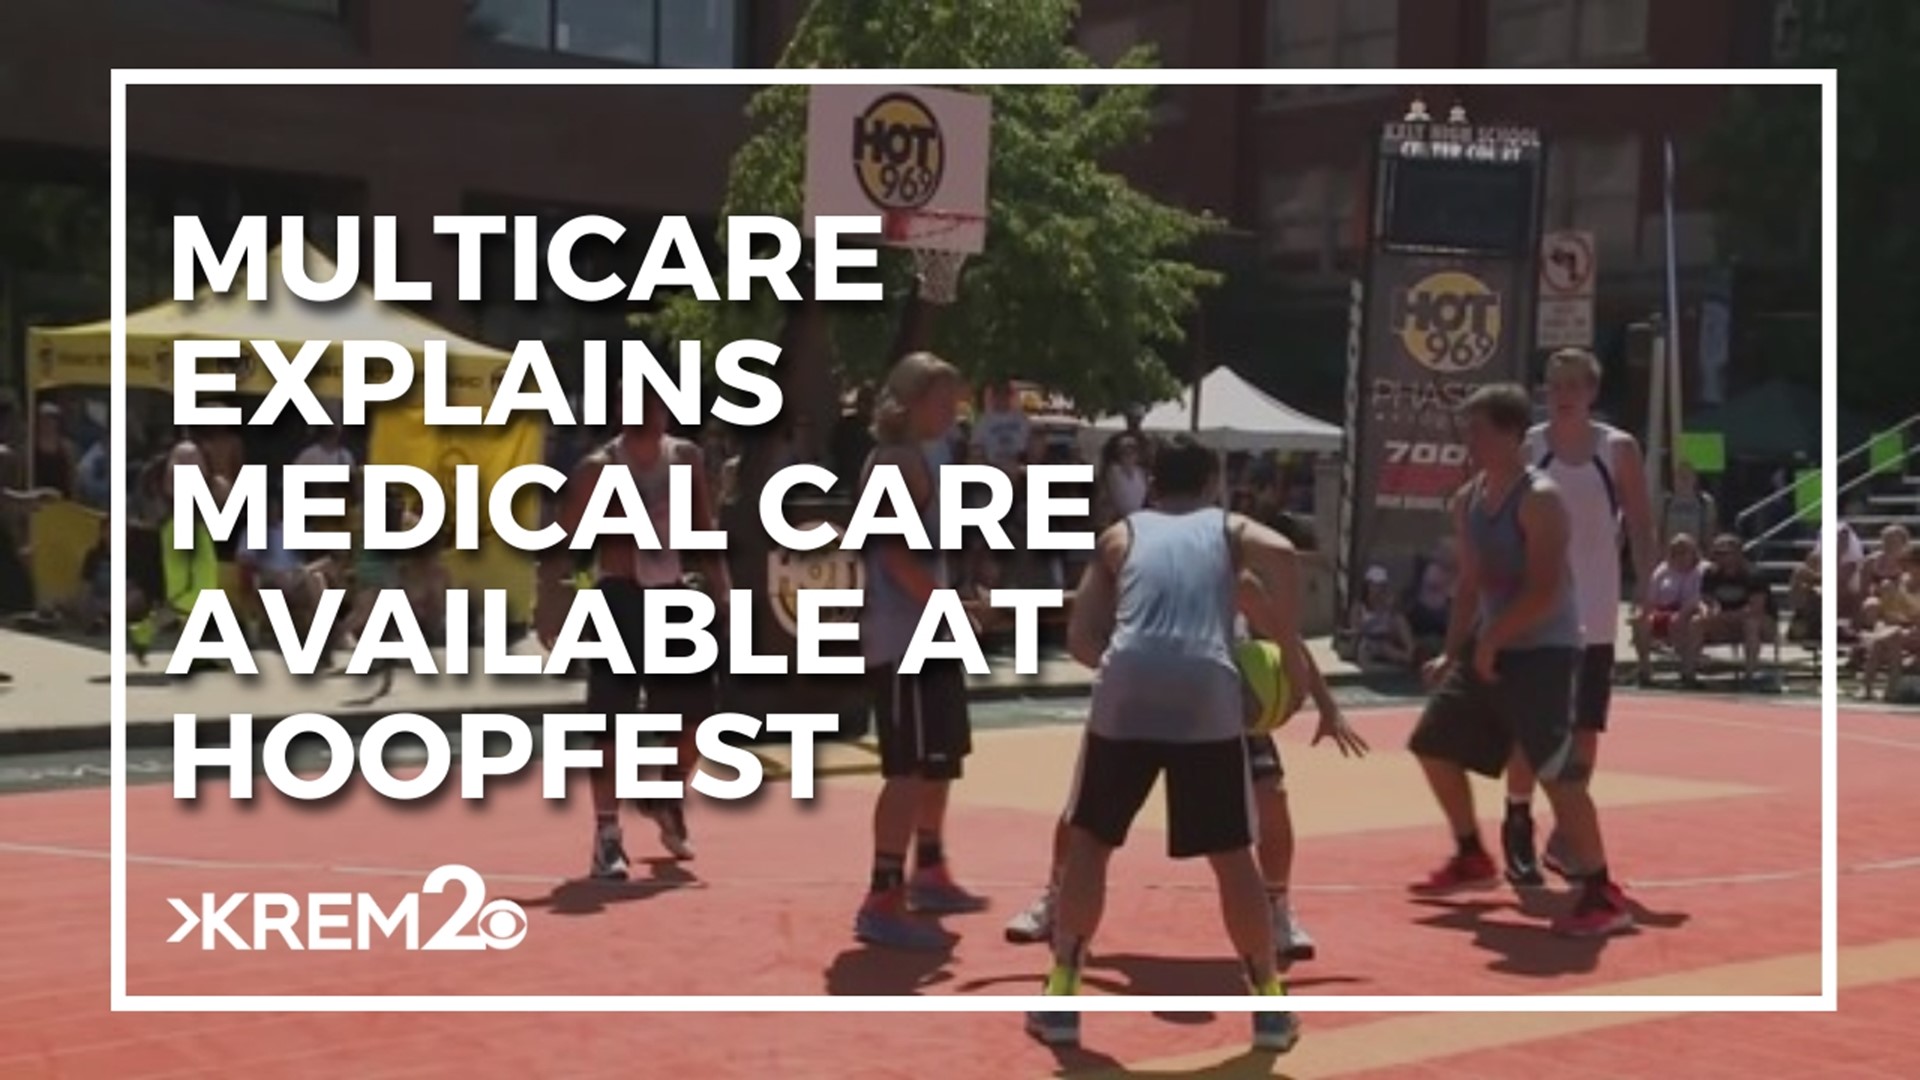 Roughly 100 medical experts will be on site ranging from athletic trainers to physicians and nurses.